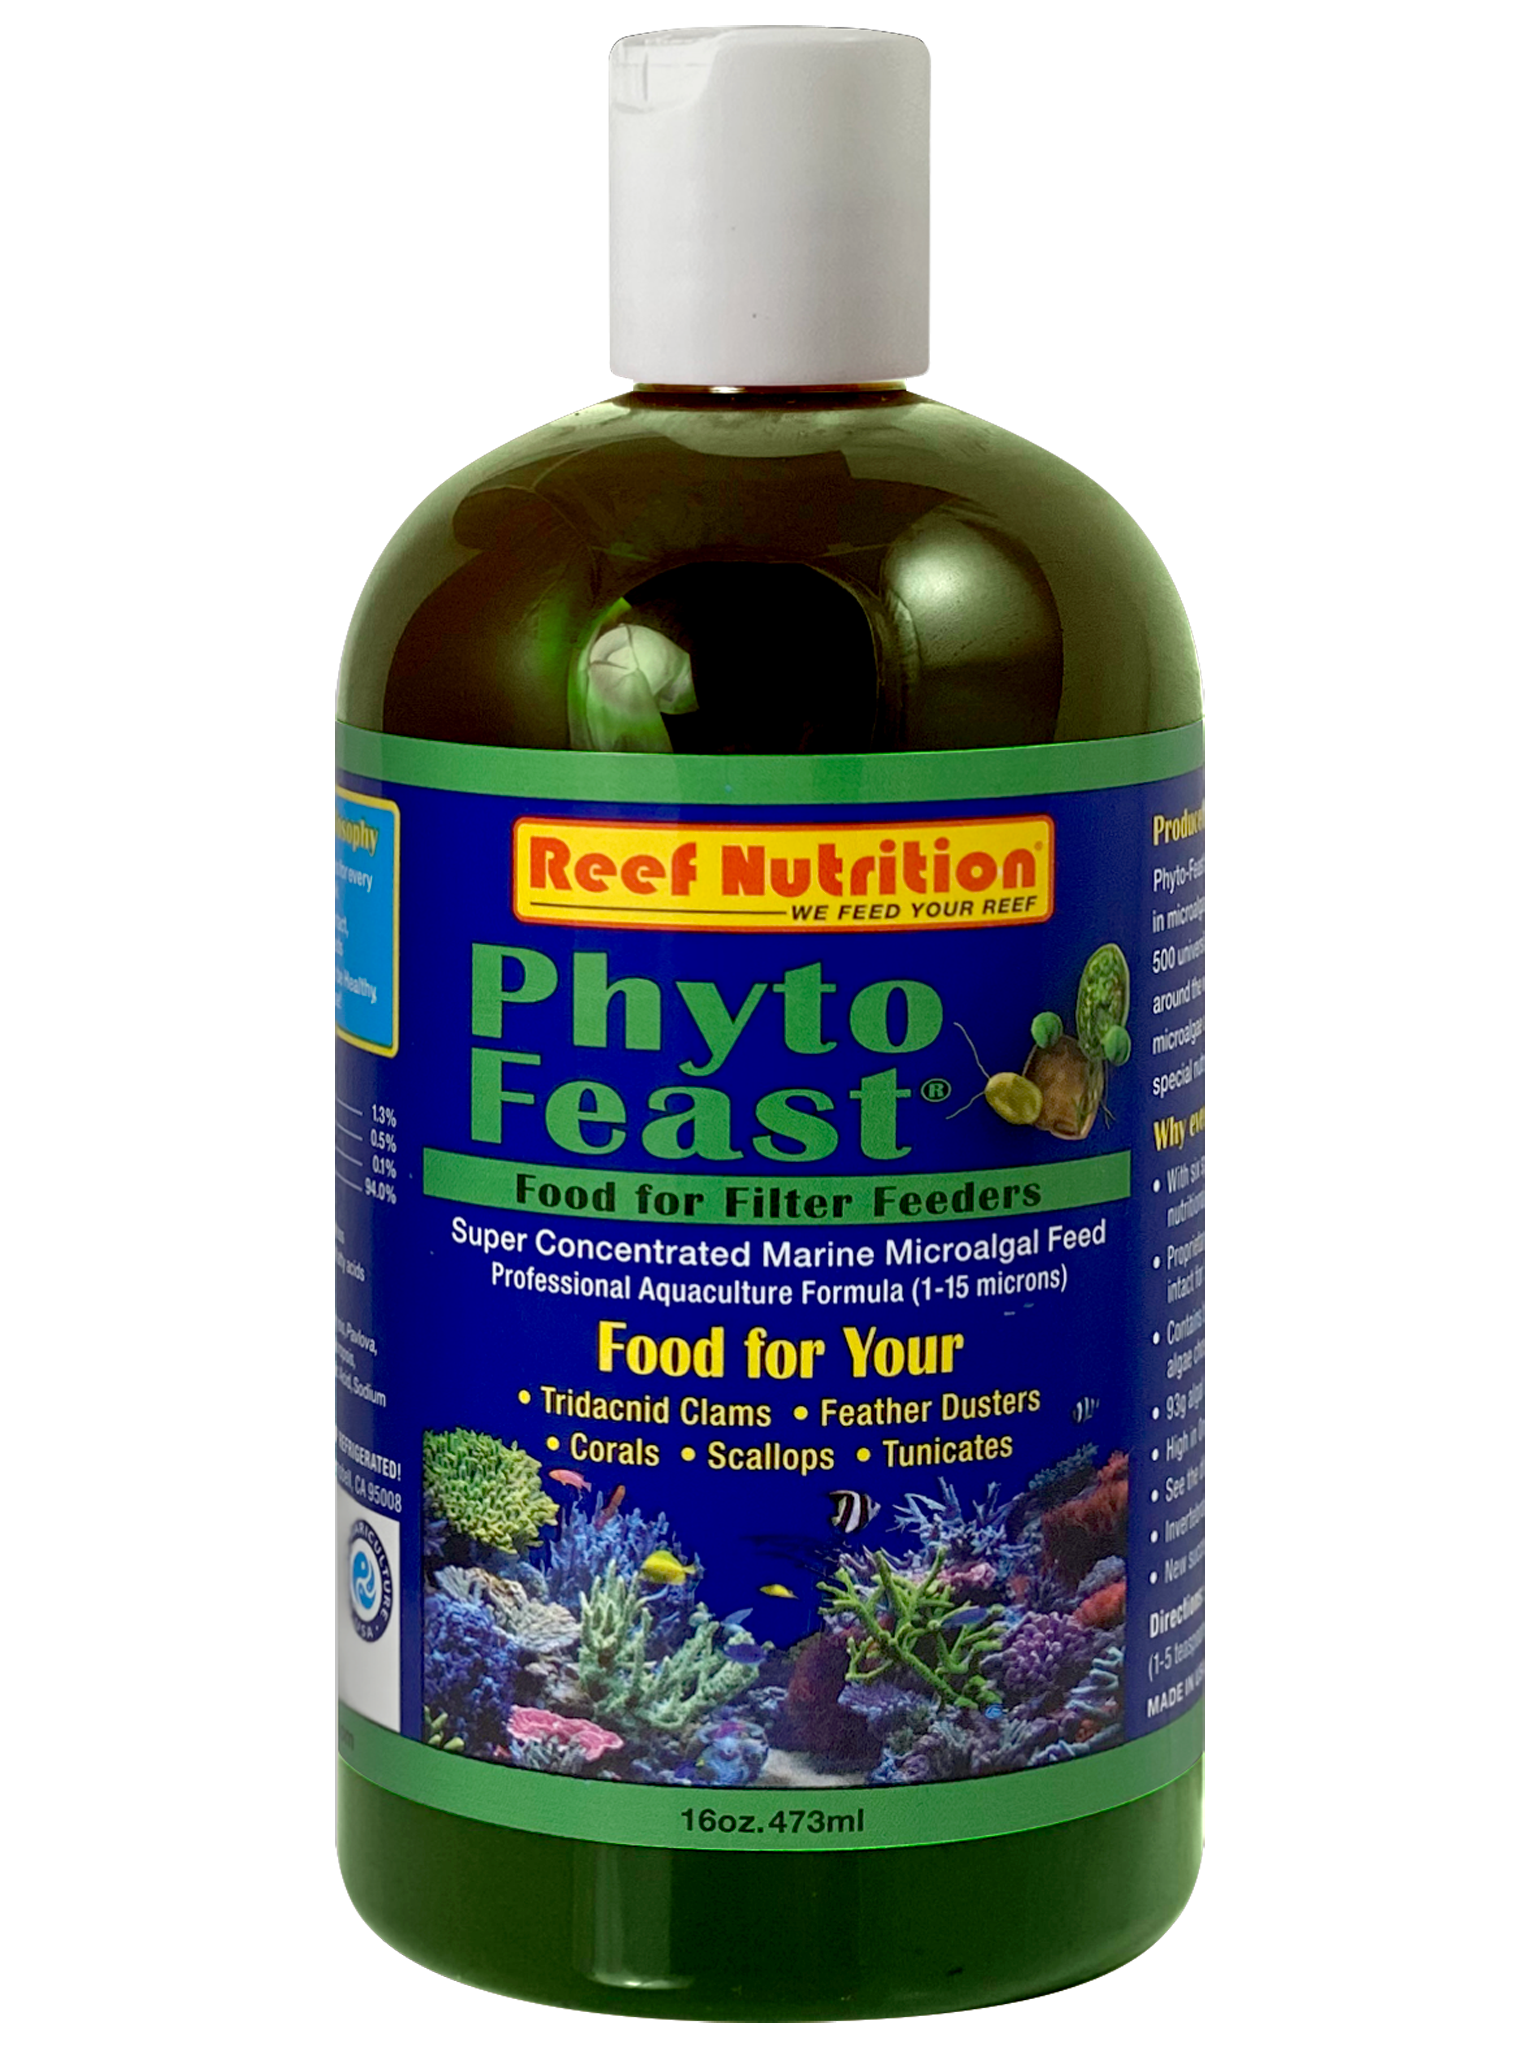 Reef Nutrition Phyto-Feast Live - 16oz